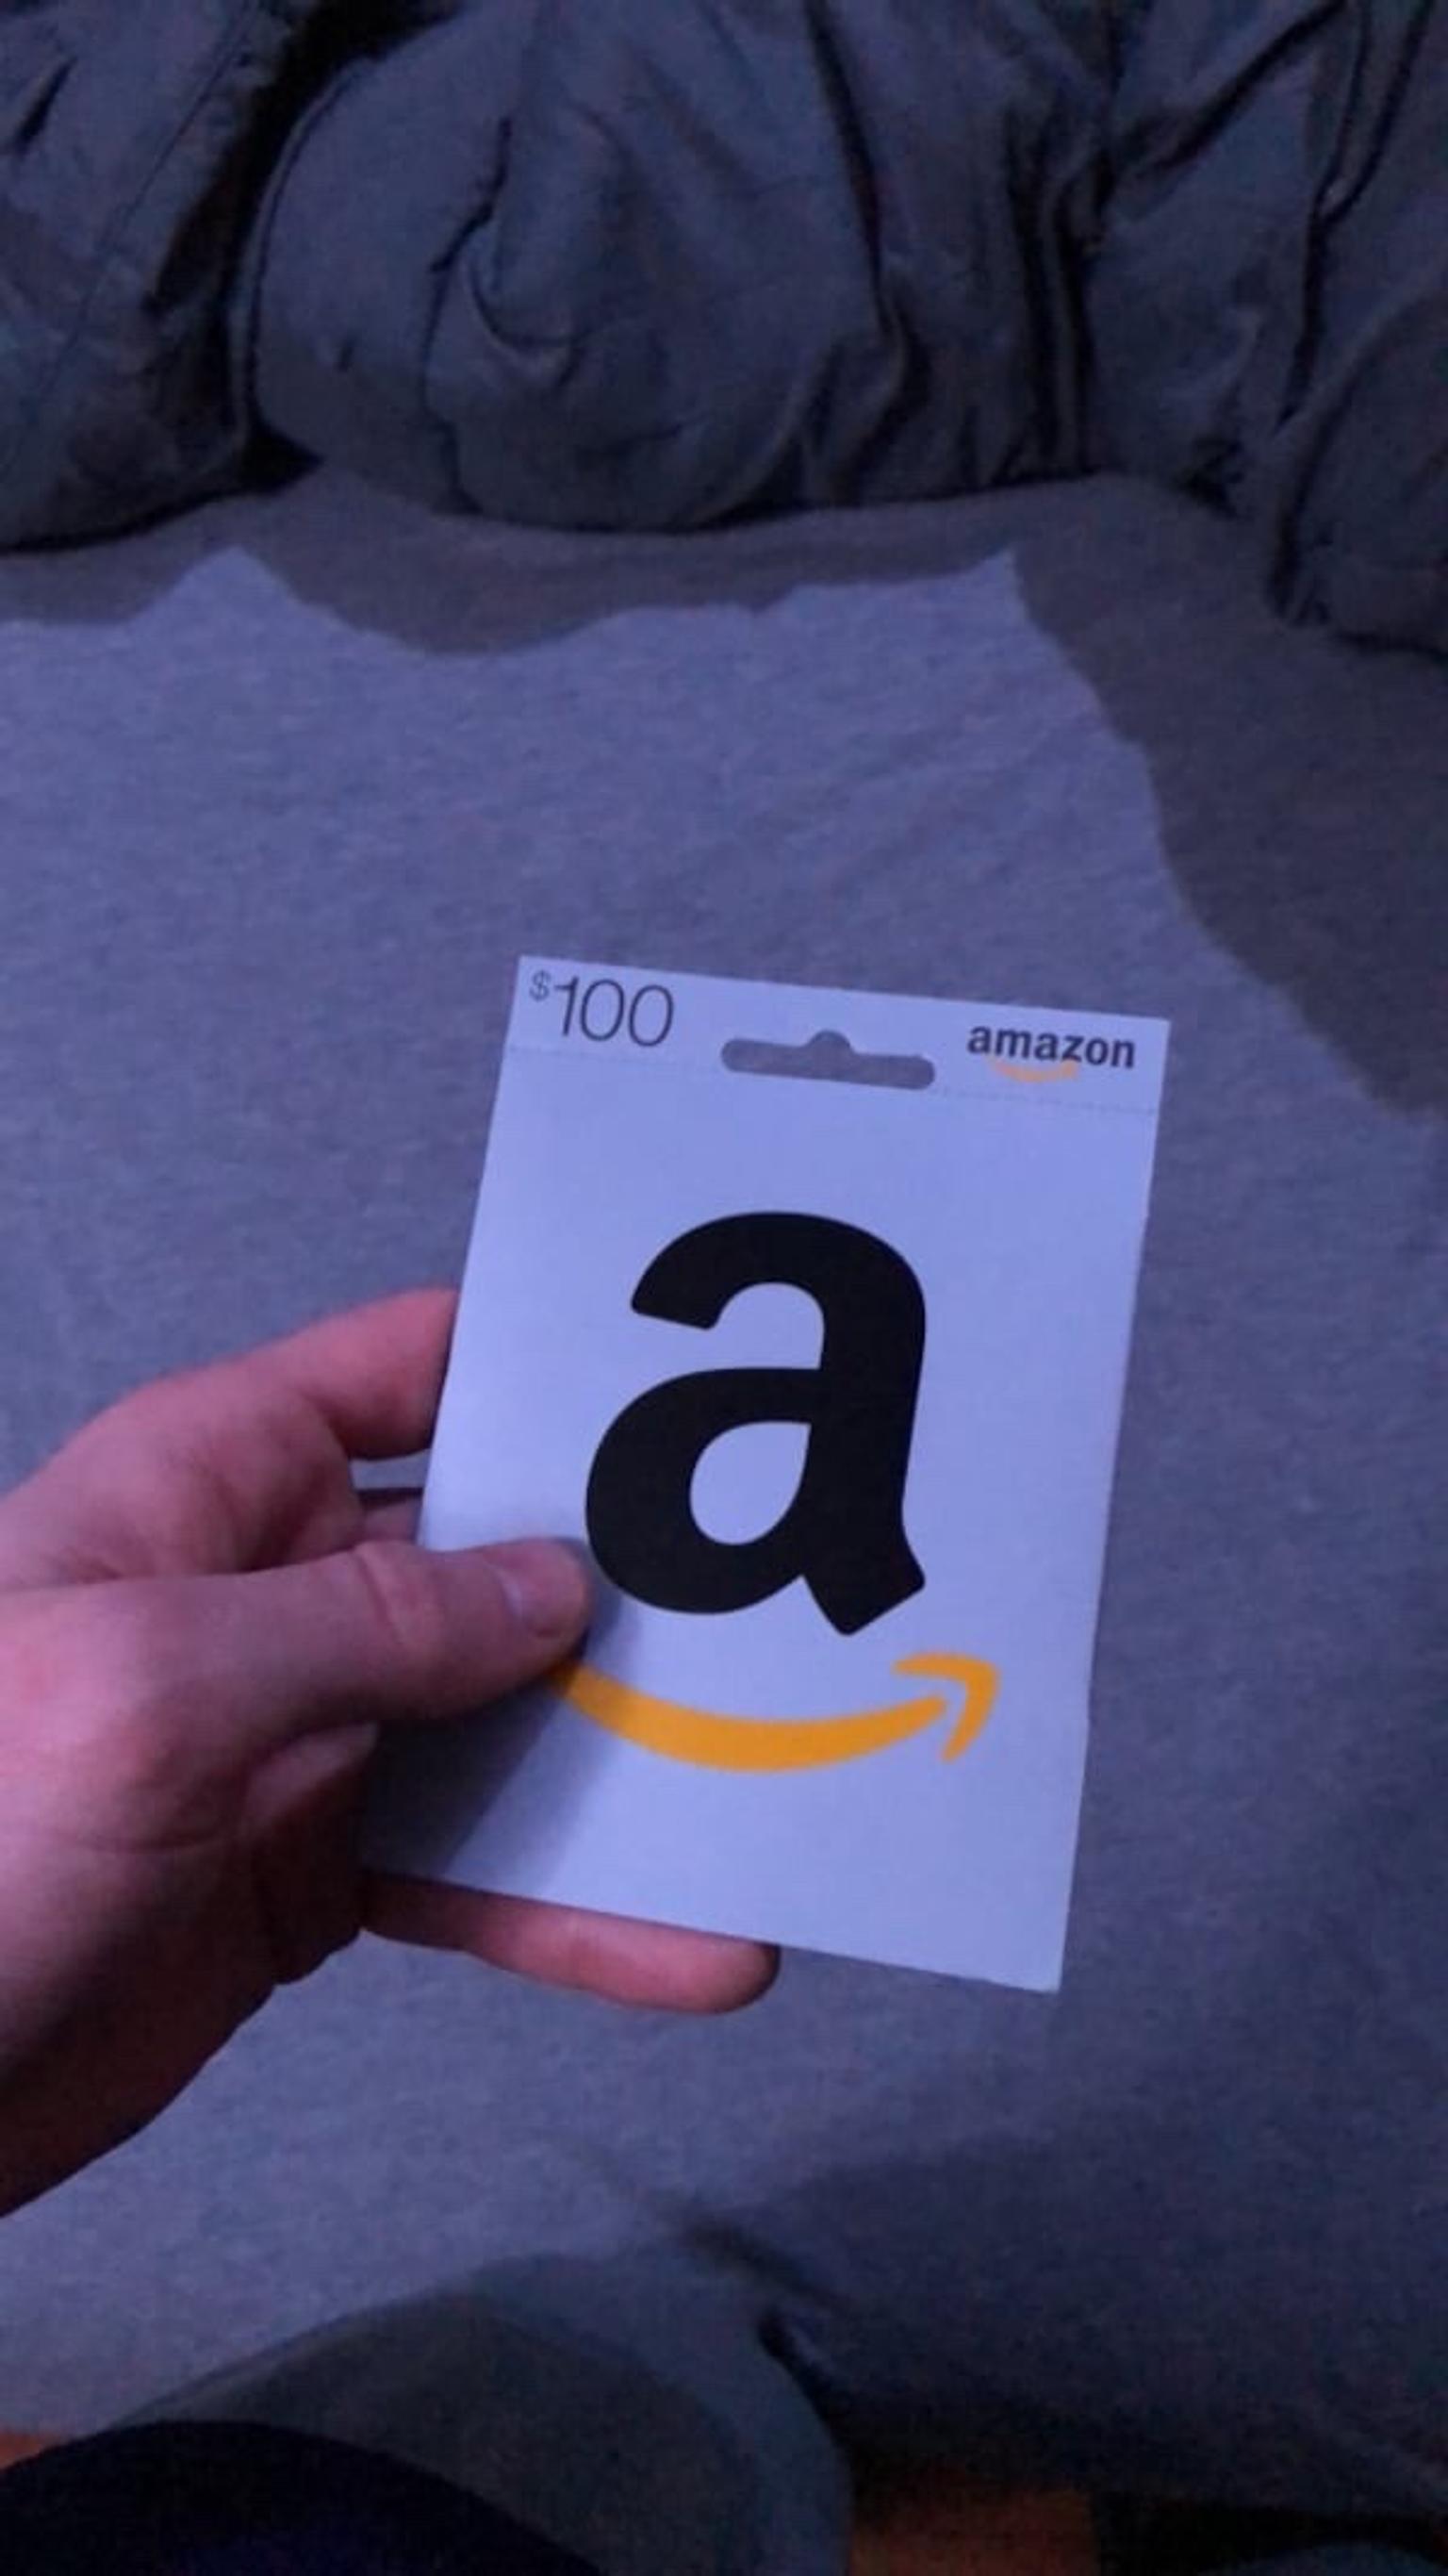 100 Amazon E Giftcard In Seattle For Us 75 00 For Sale Shpock